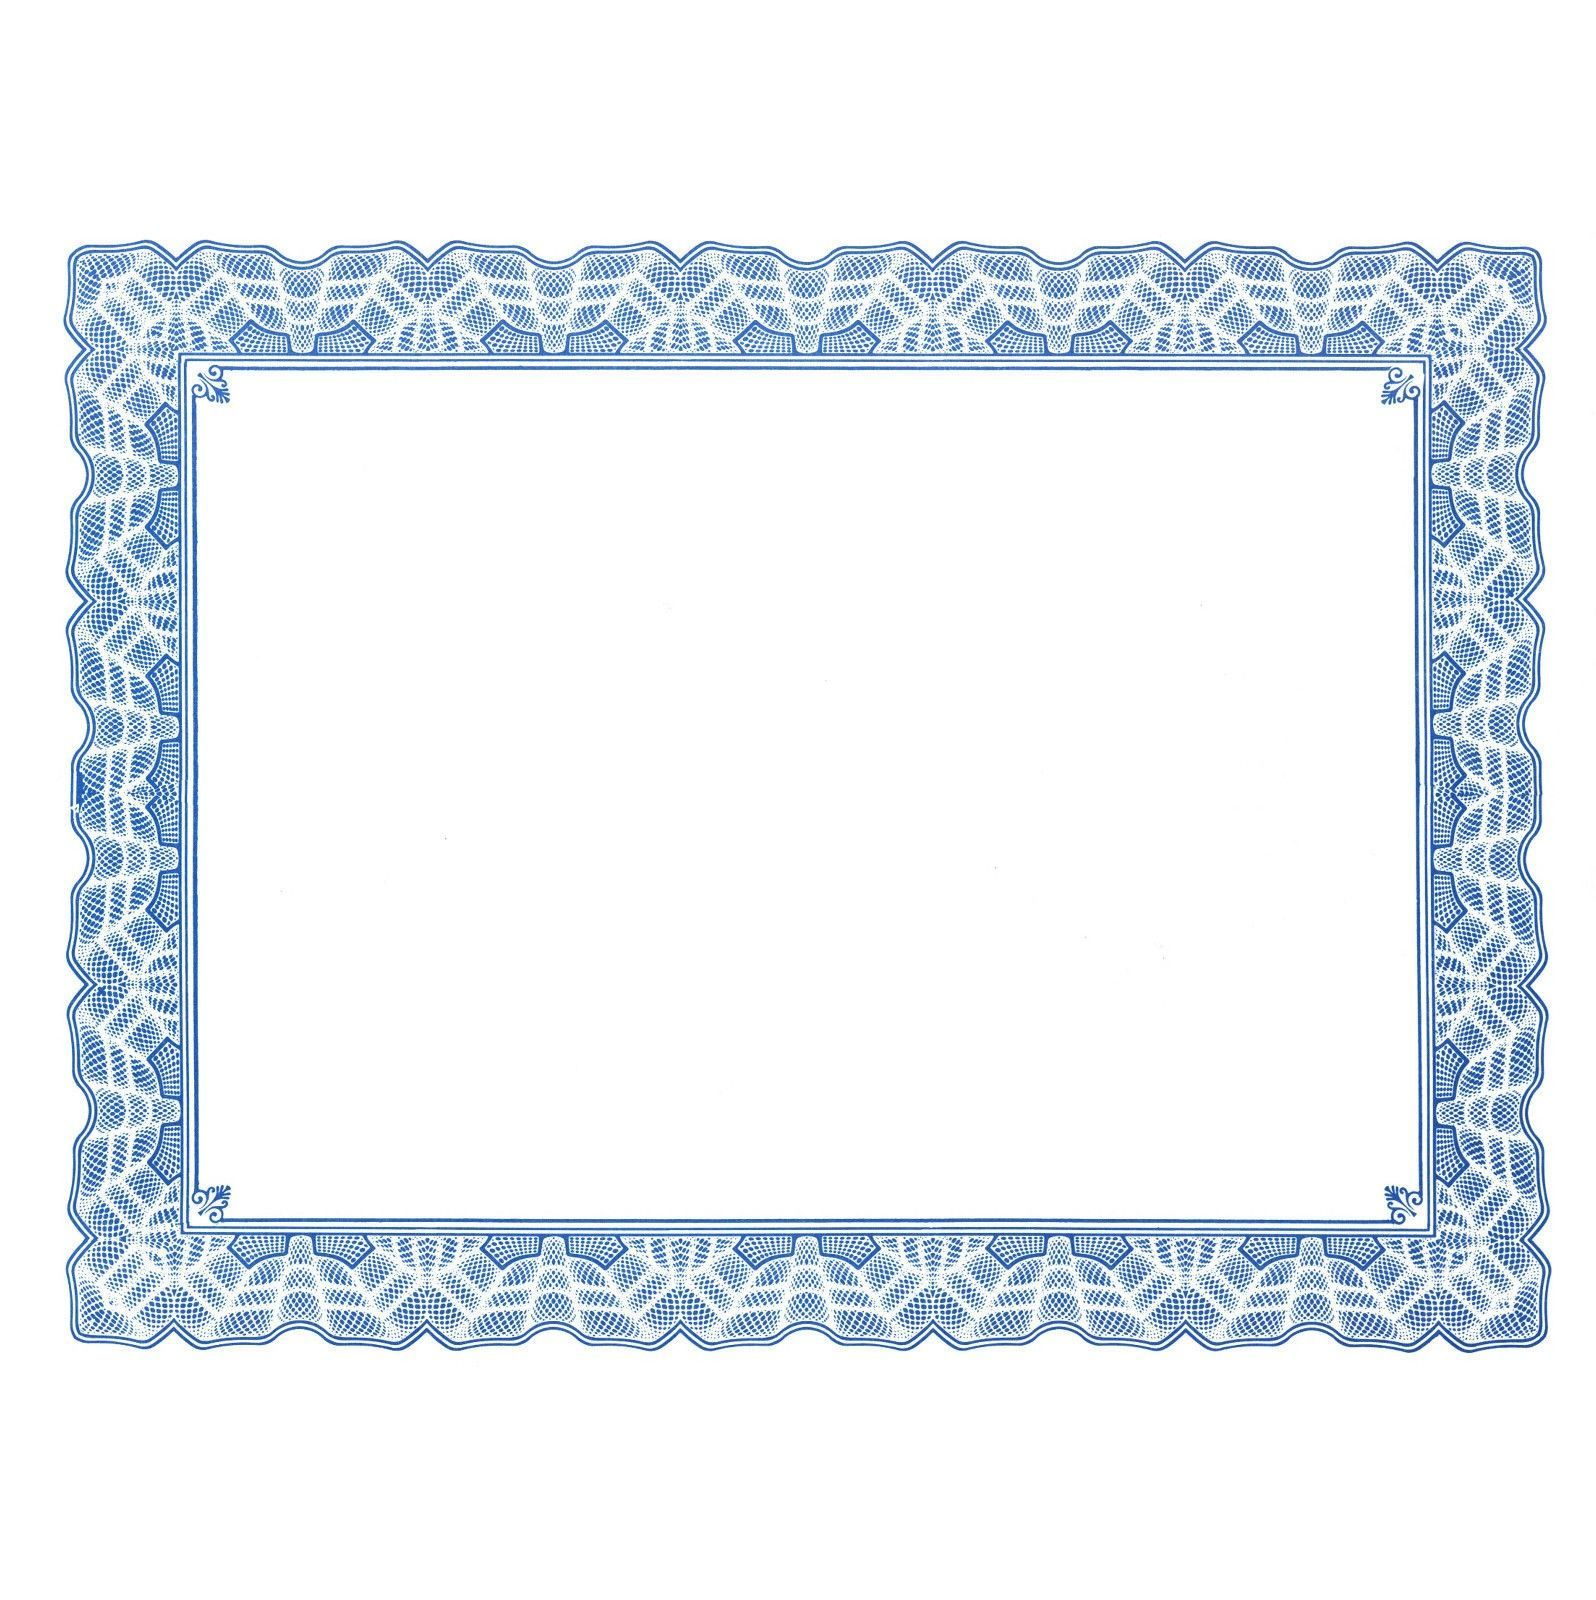 Certificate Border Templates For Word  | Pictures In 2019 Regarding Free Printable Certificate Border Templates